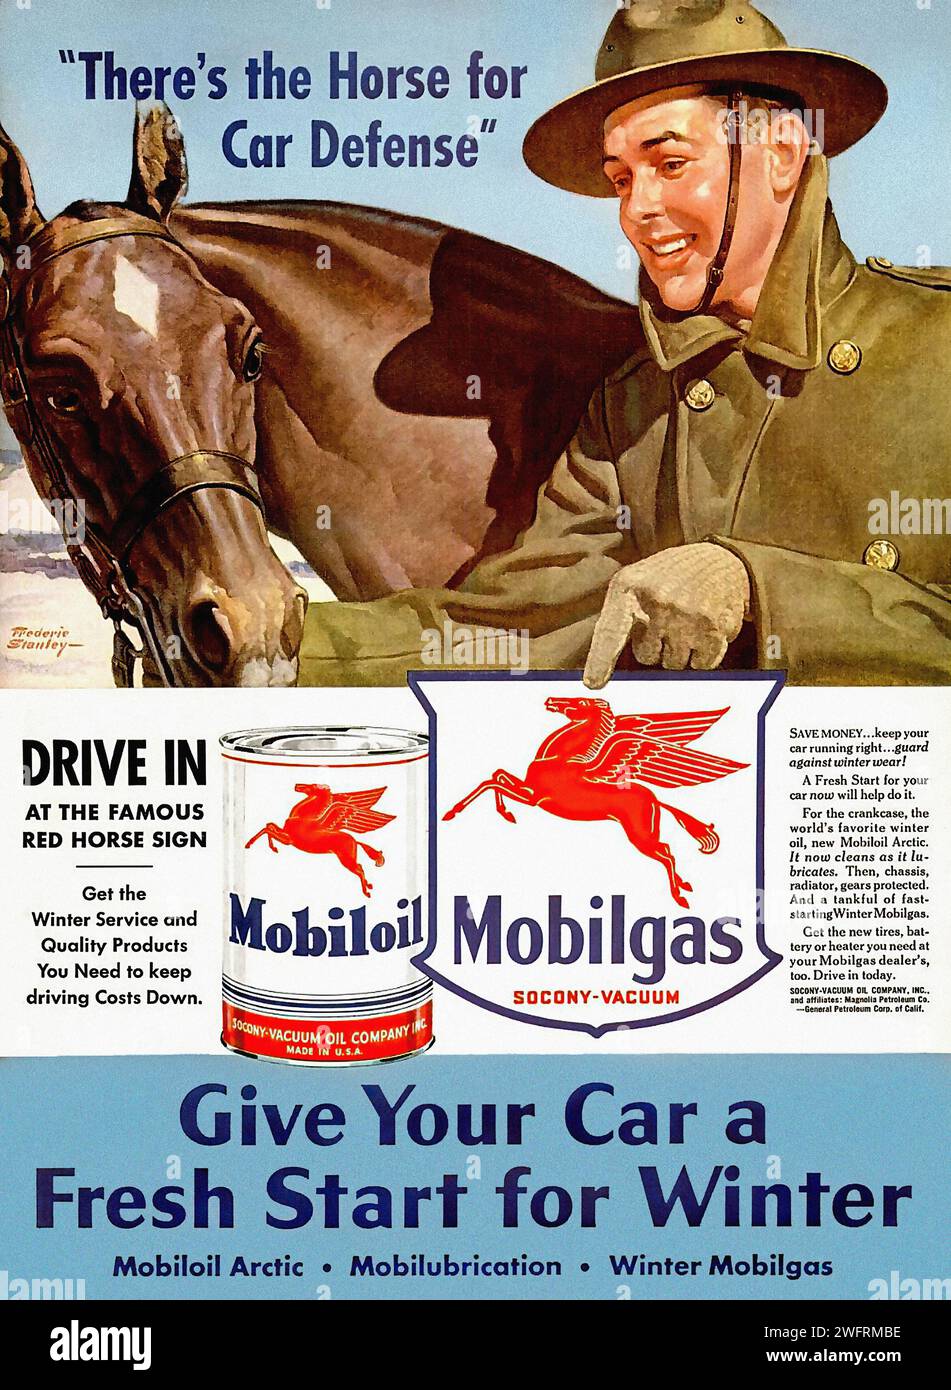 “THERE’S THE HORSE FOR CAR DEFENSE” “GIVE YOUR CAR A FRESH START FOR WINTER” “SATISFACTORY SERVICE AT THE FAMOUS RED HORSE SIGN”  This is a vintage advertisement poster for Mobil Oil, originating from the United States during the World War II era. The poster features a vibrant blue background with a red border, and a large image of a man in a cowboy hat alongside a horse. The text emphasizes the reliability and quality of Mobil Oil products, appealing to the consumer’s need for car defense and a fresh start for winter. Two smaller images showcase Mobil Oil products, one with a red horse sign a Stock Photo